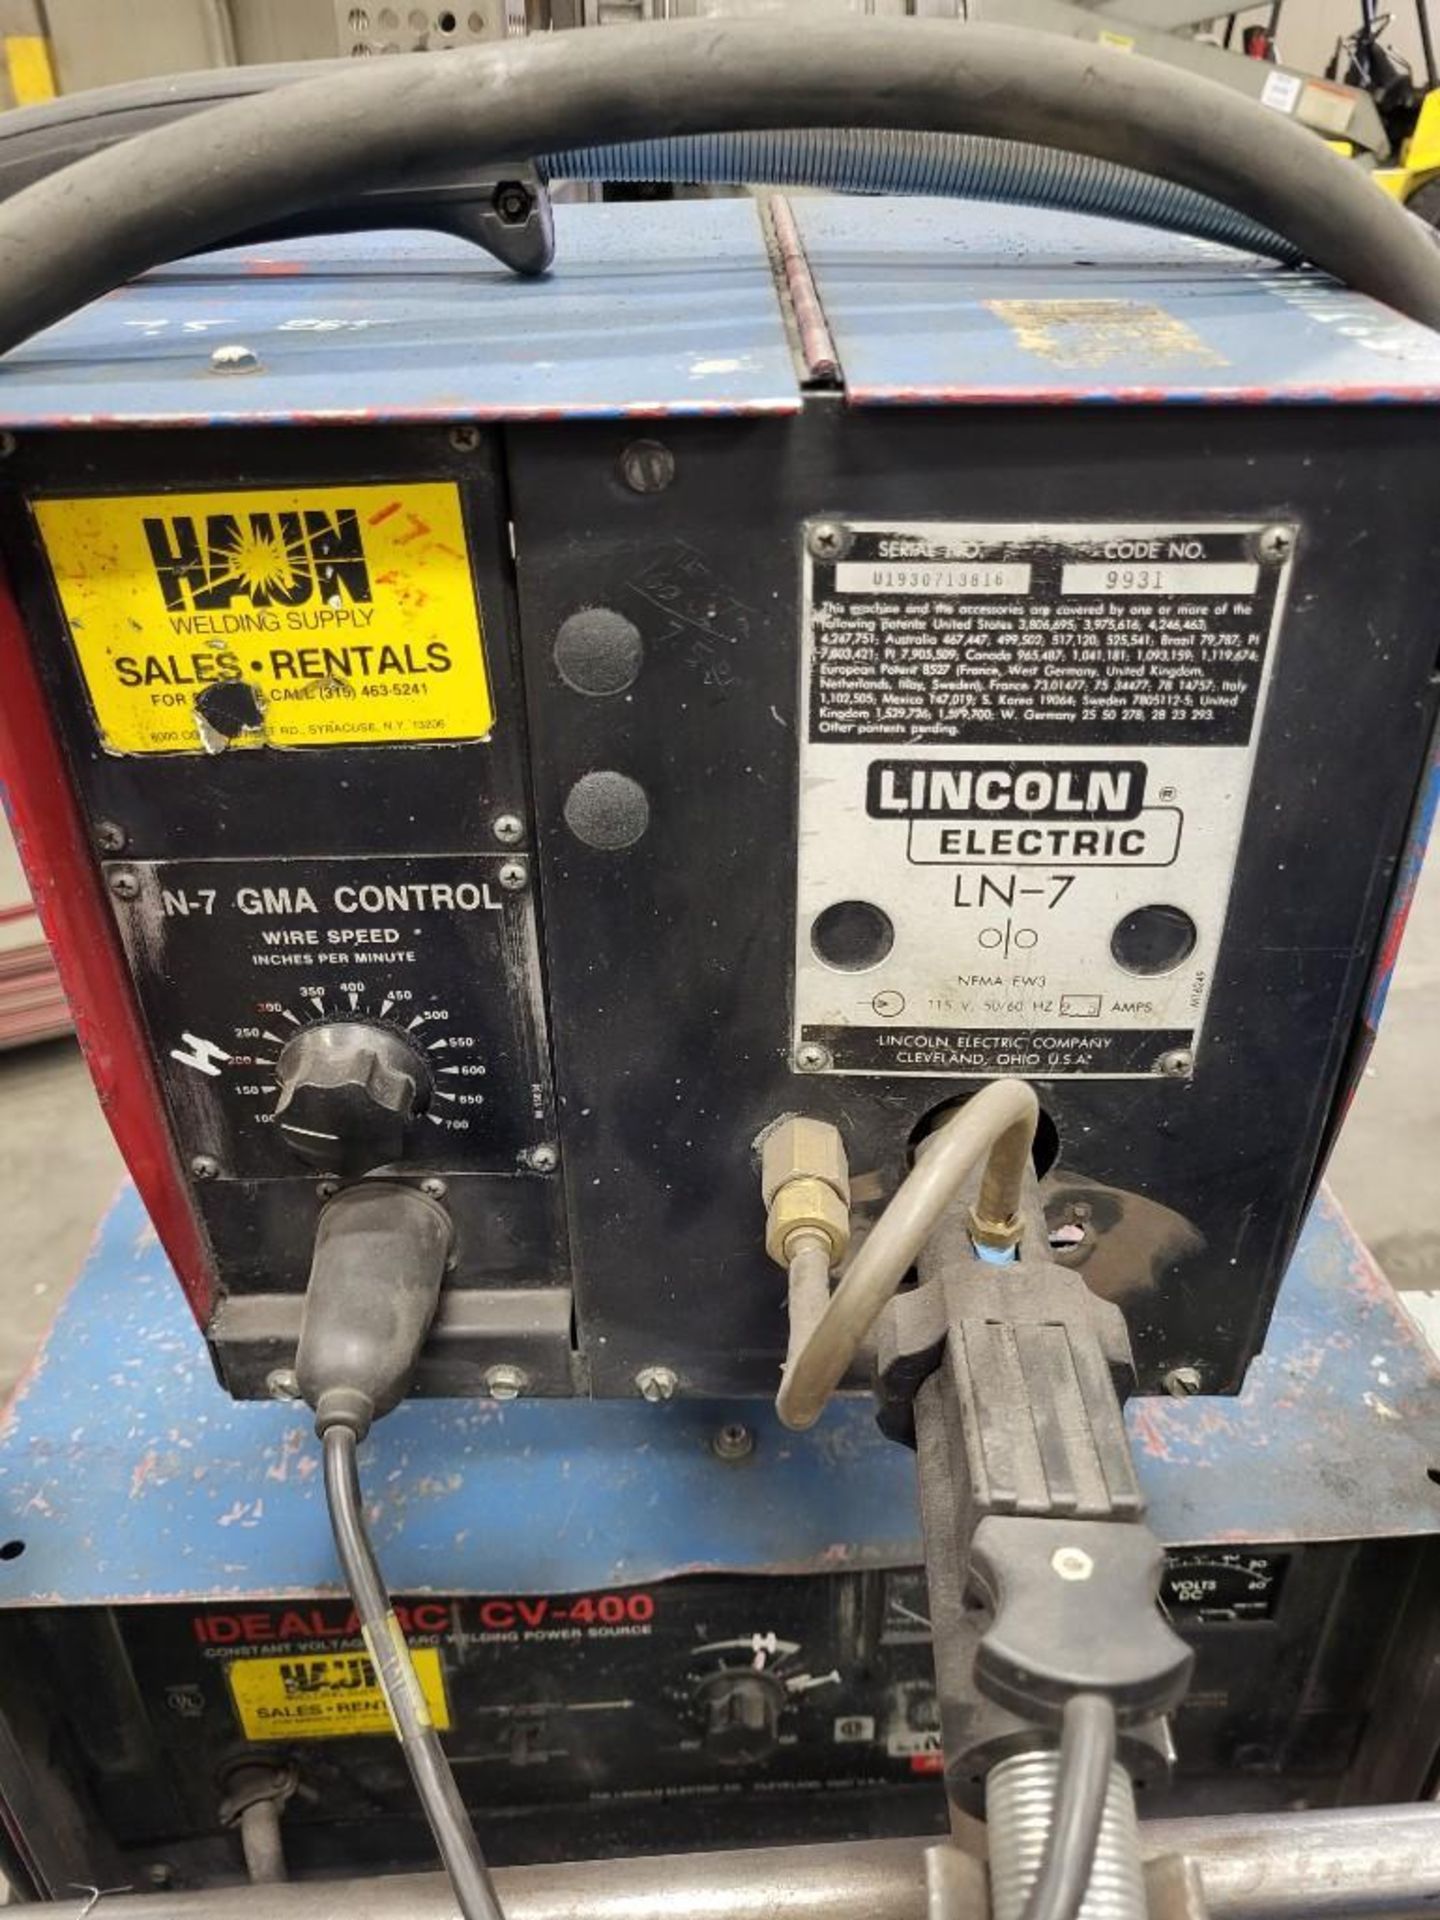 LINCOLN ELECTRIC IDEALARC CV-400 MIG WELDER WITH LN-7 WIRE FEEDER - Image 6 of 11